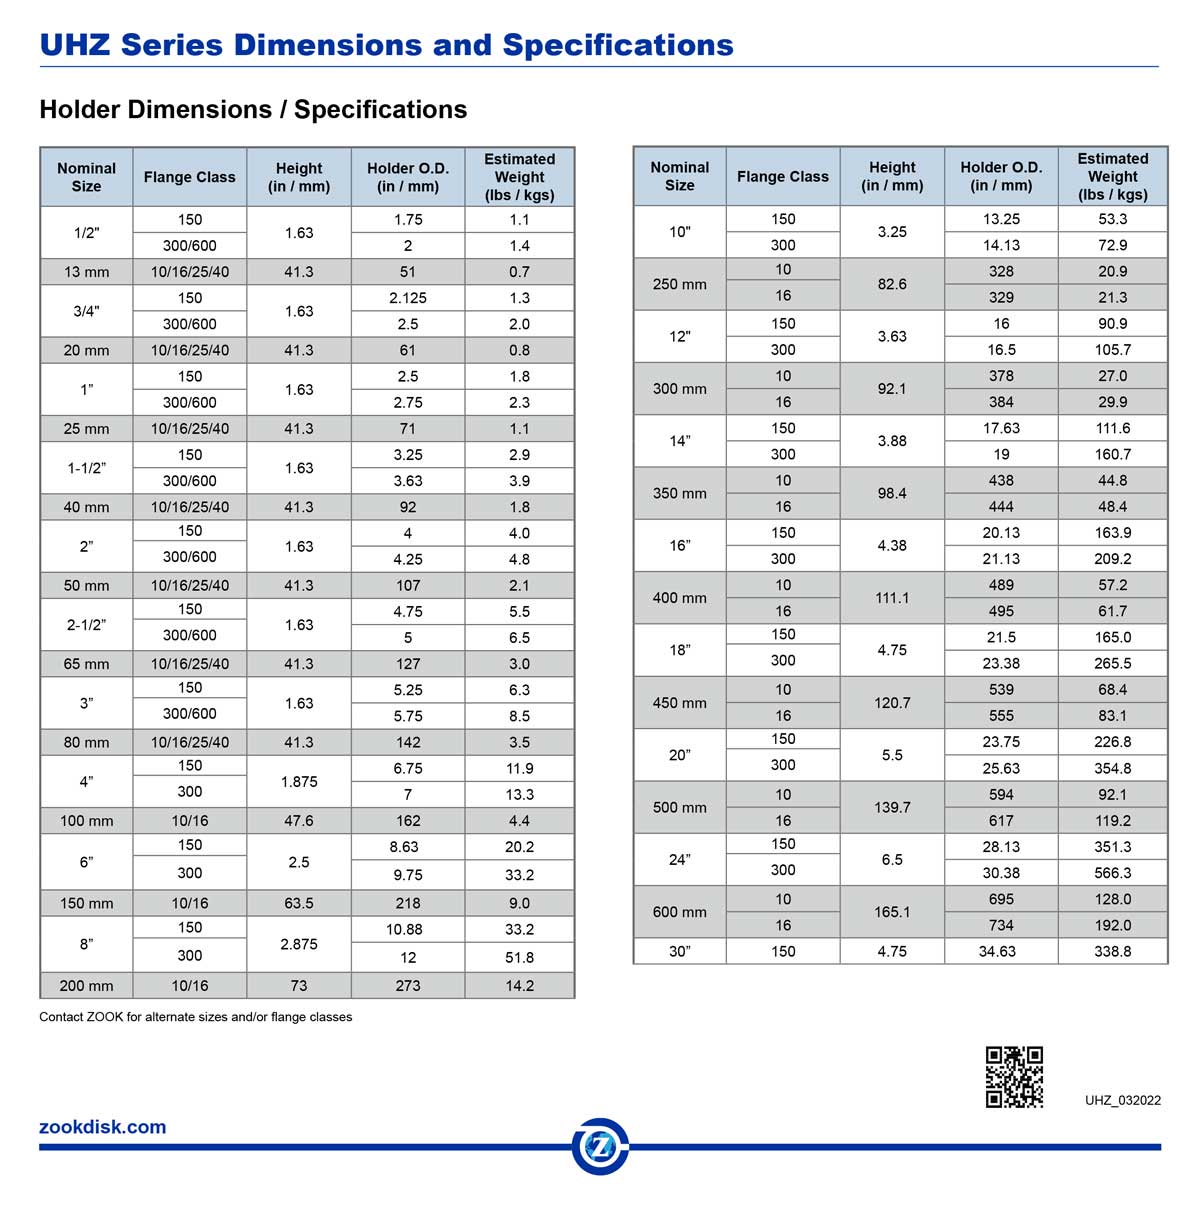 UHZ Holder Specifications